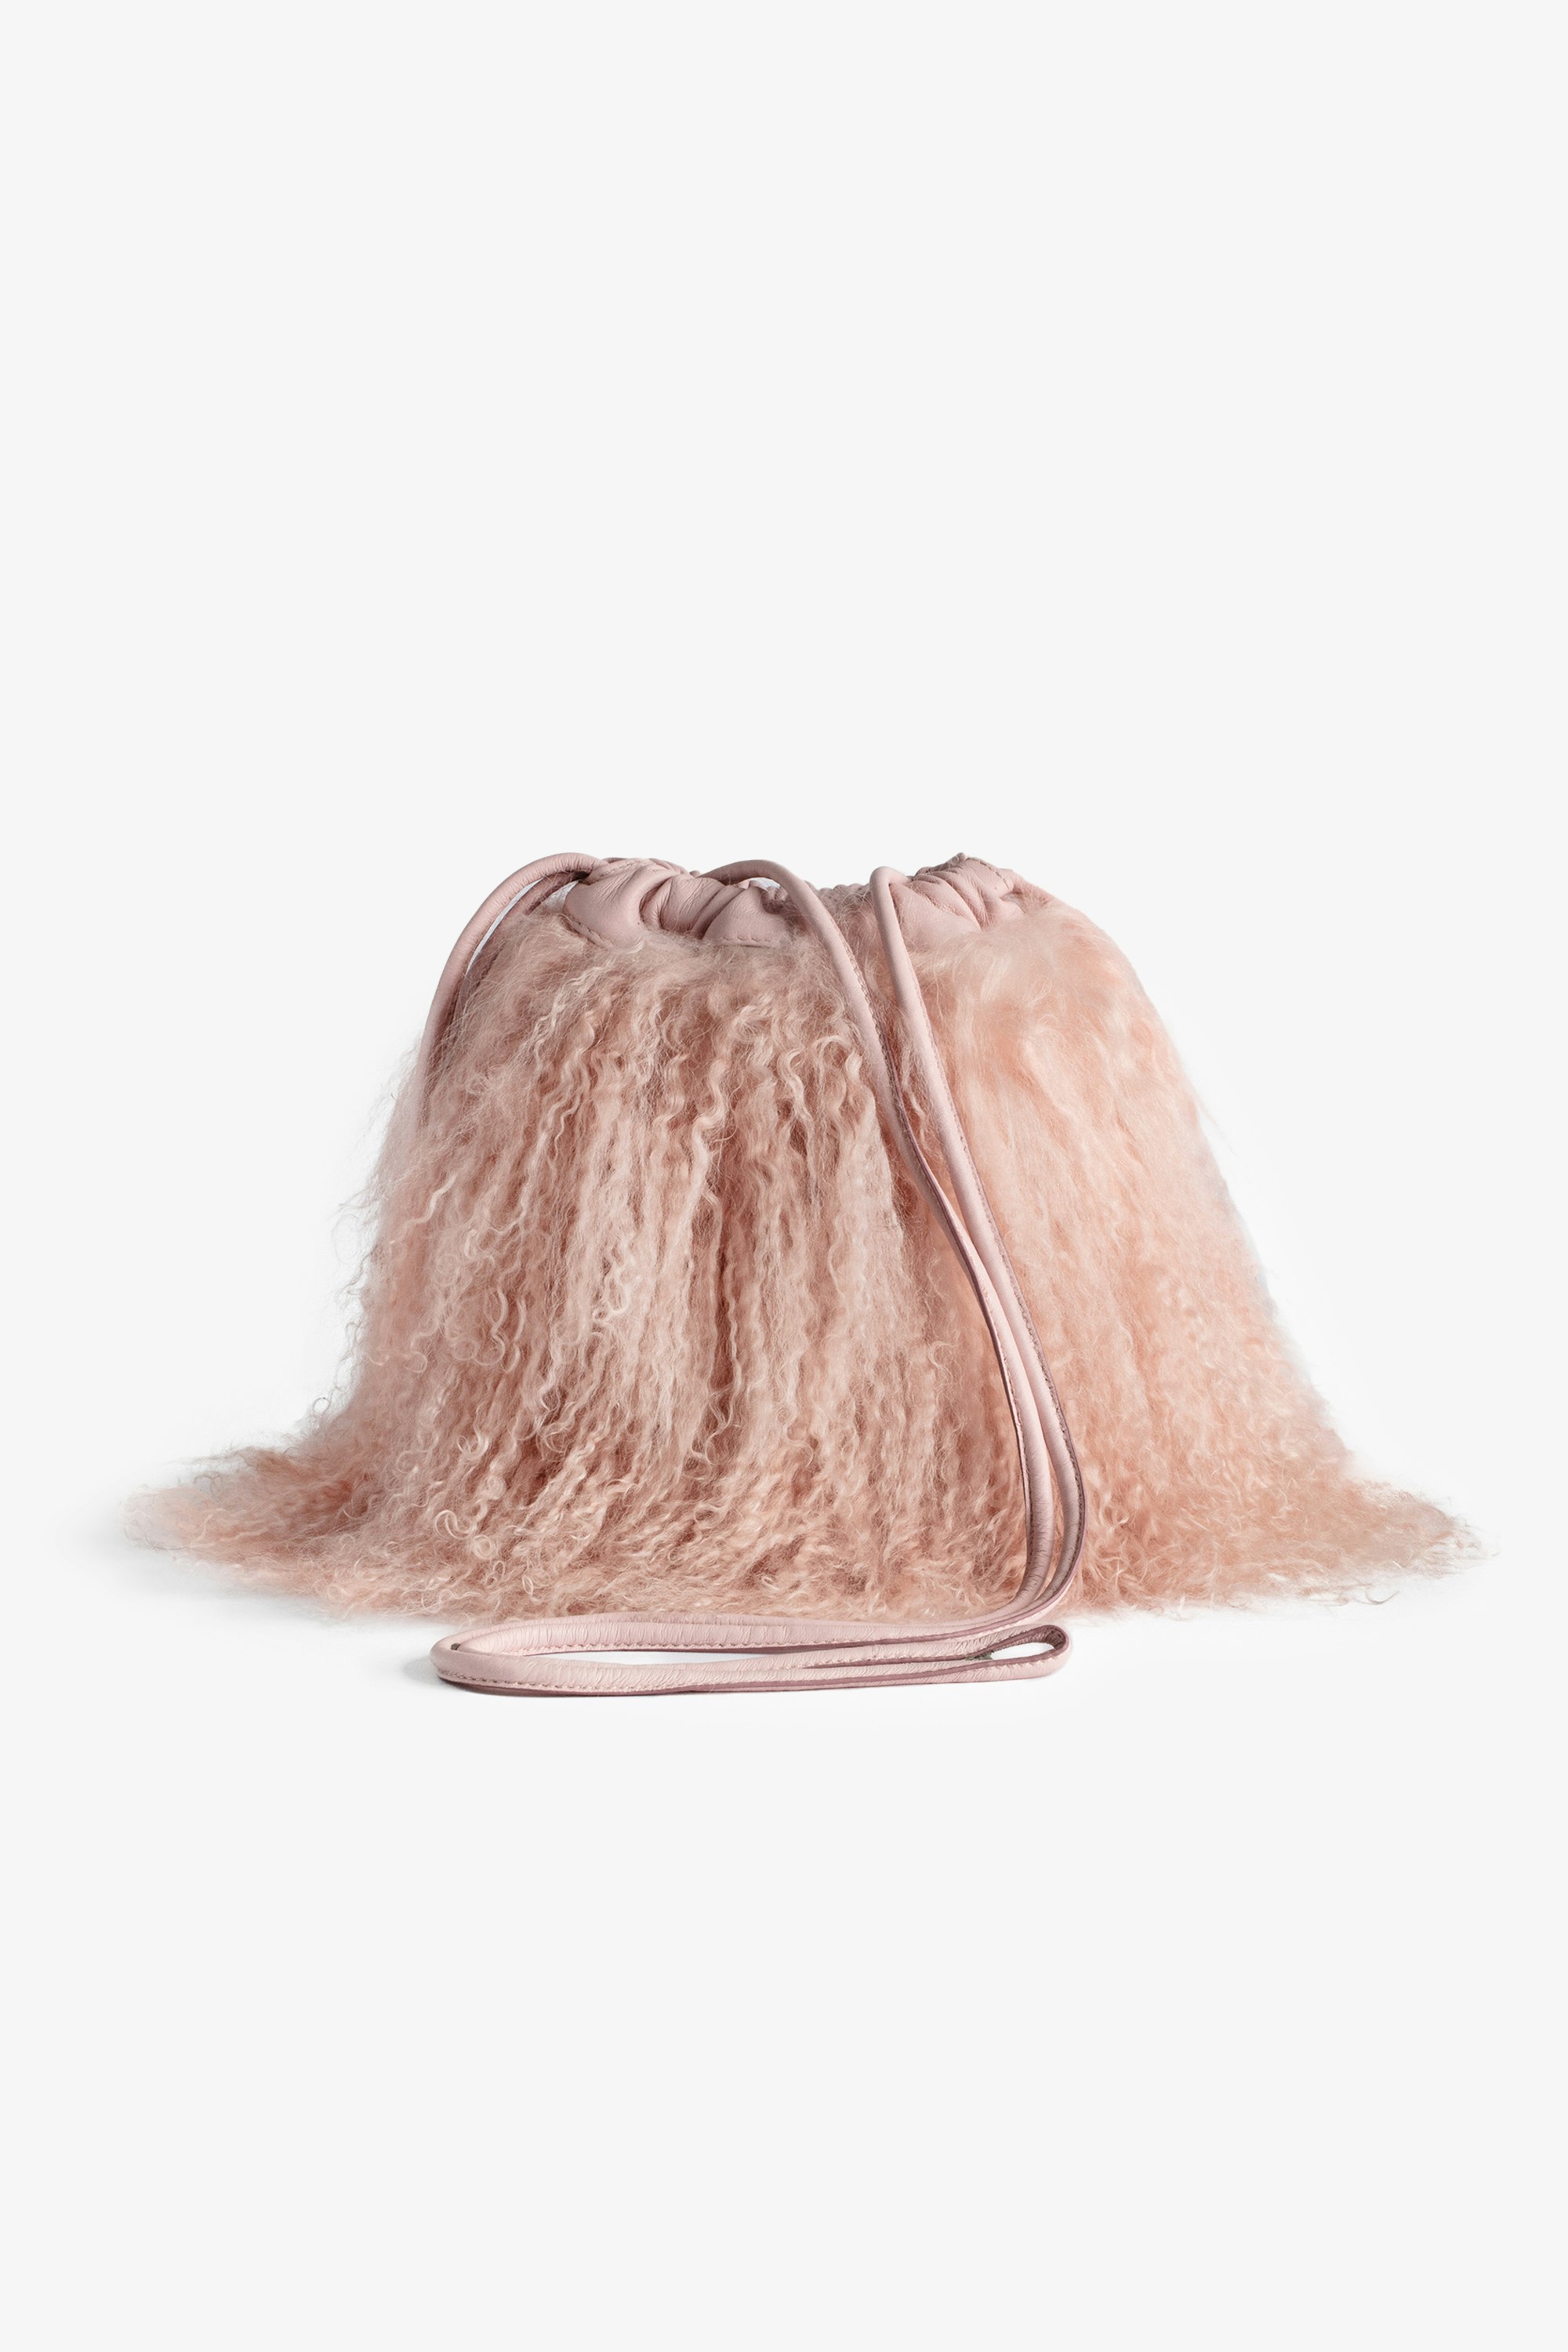 Rock To Go Frenzy Shearling Bag Women’s small bucket bag in pink shearling leather with drawstring and shoulder strap.